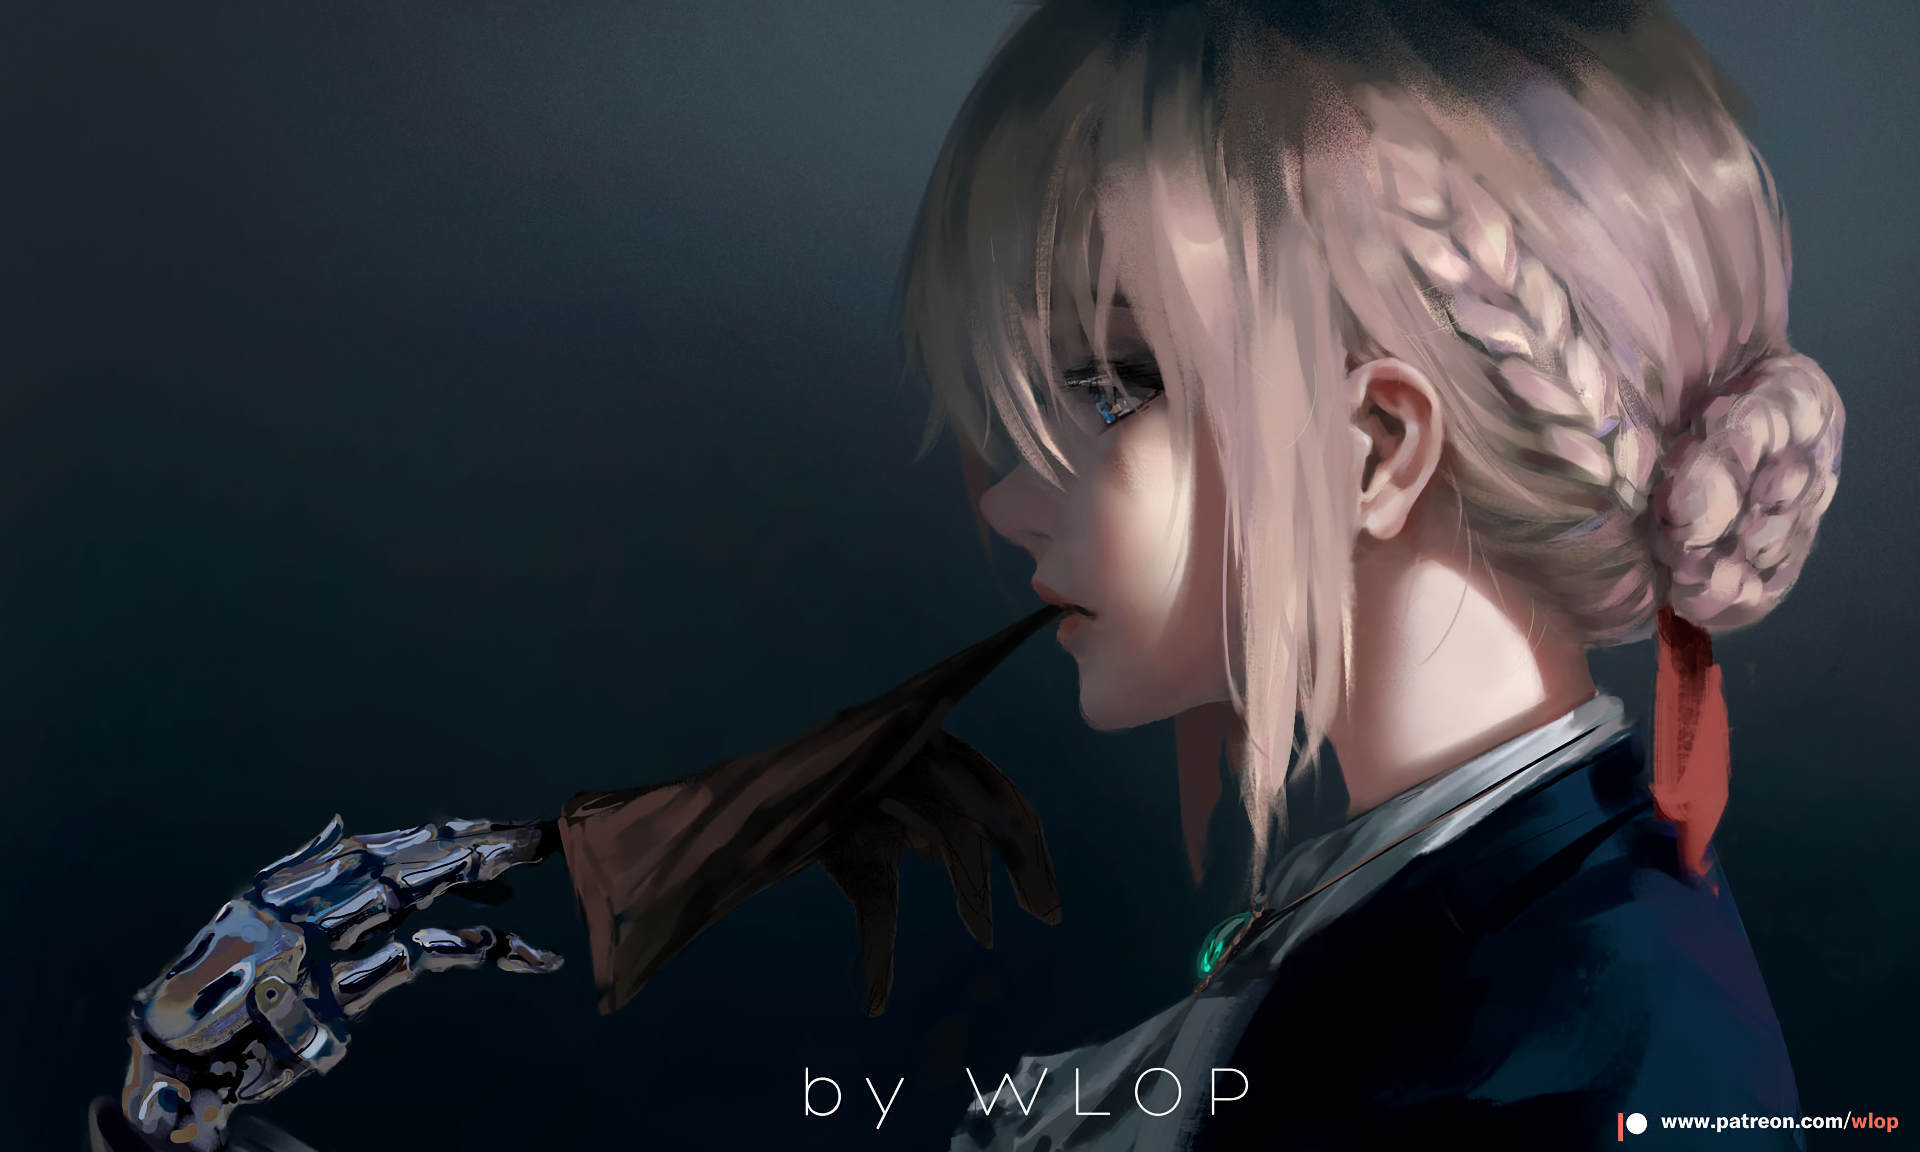 Violet Evergarden Art by Wang Ling